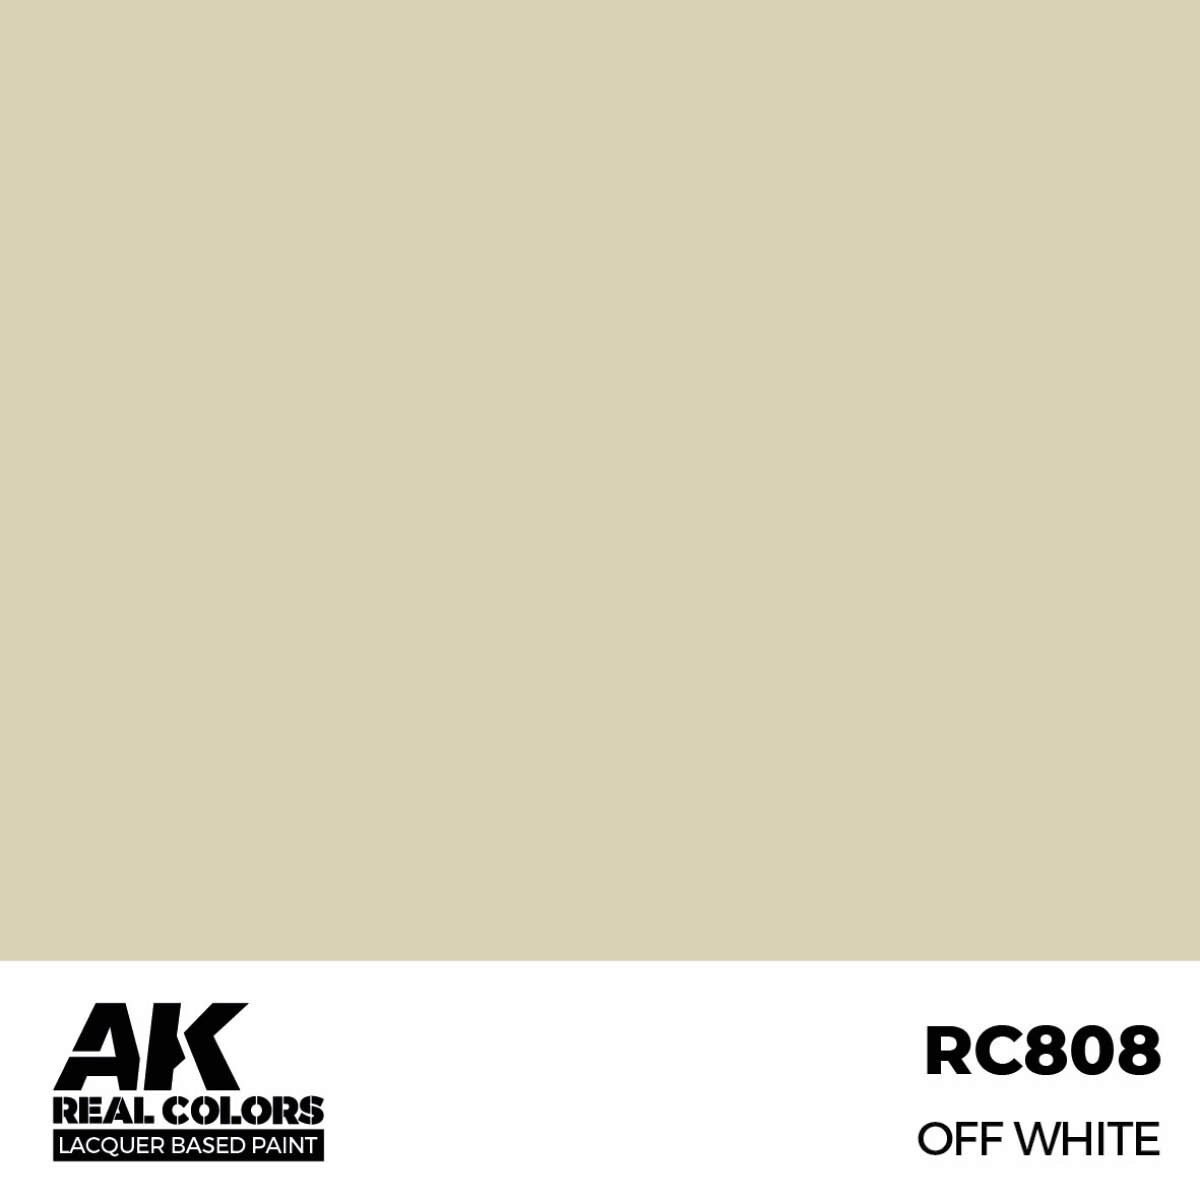 AK RC808 Real Colors Off White 17 ml.